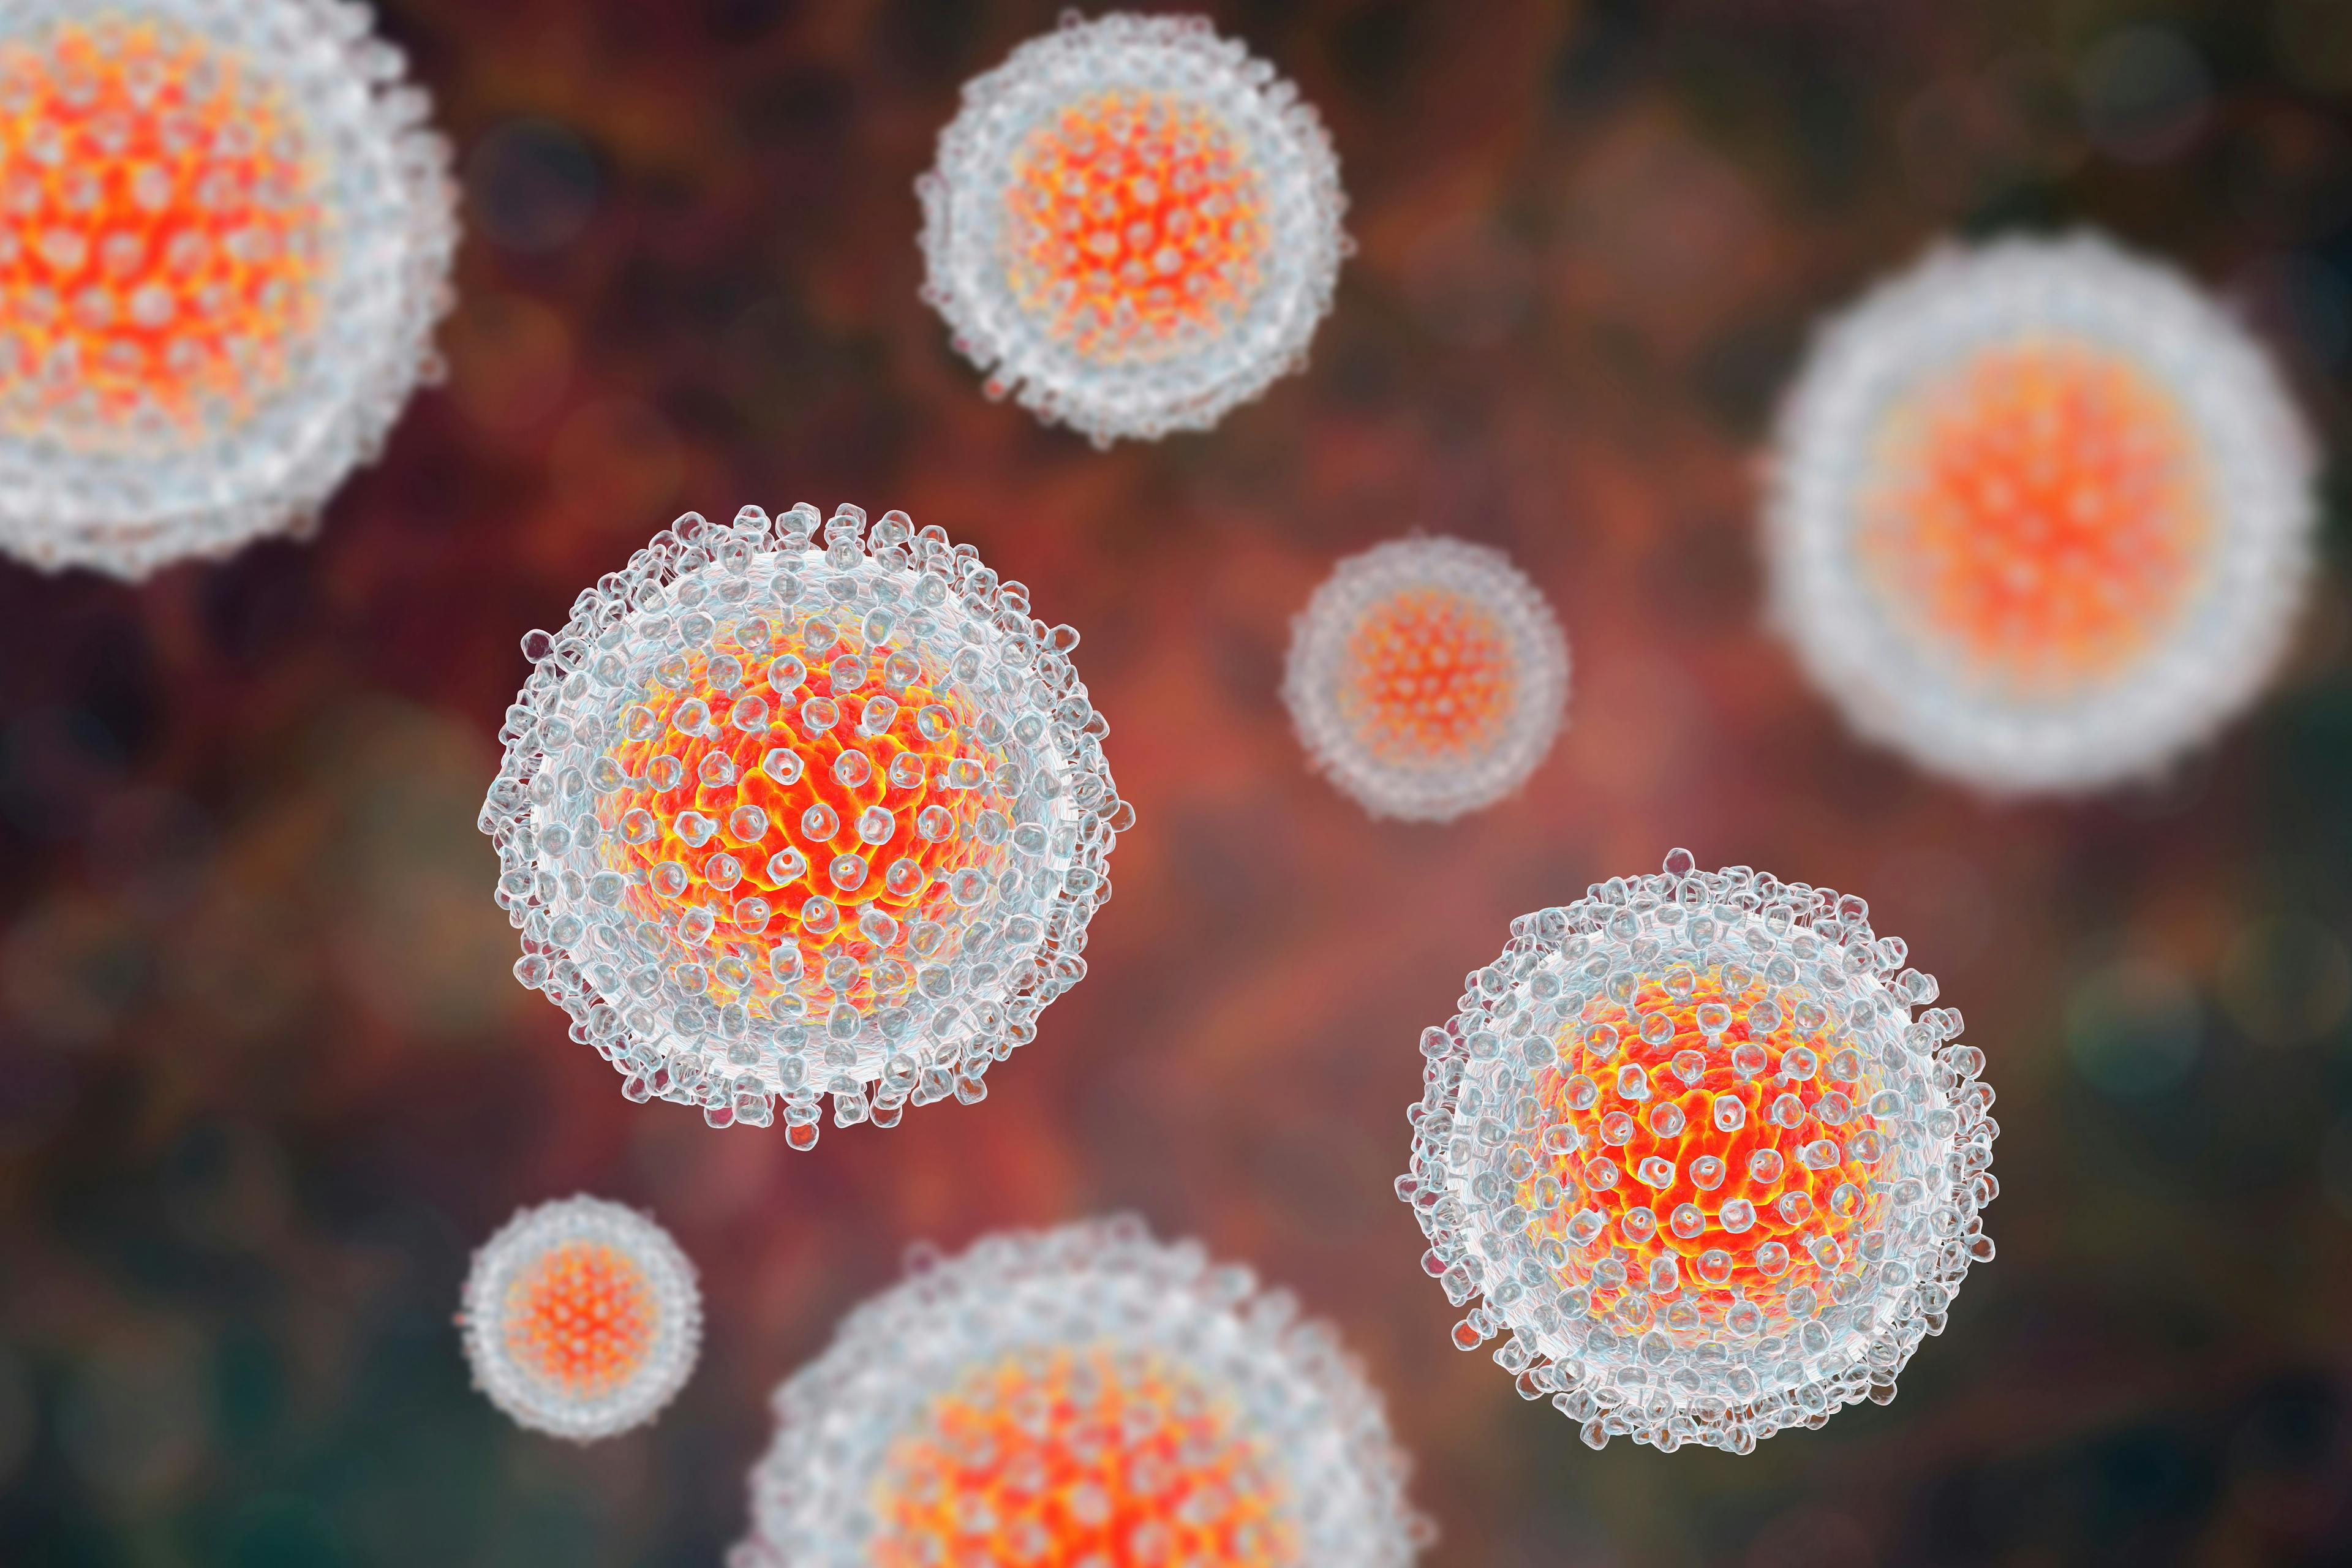 Hepatitis C virus model, 3D illustration. A virus consists of a protein coat, capsid, surrounding RNA and outer lipoprotein envelope with two types of glycoprotein spikes, E1 and E2 | Image Credit: Dr_Microbe - stock.adobe.com